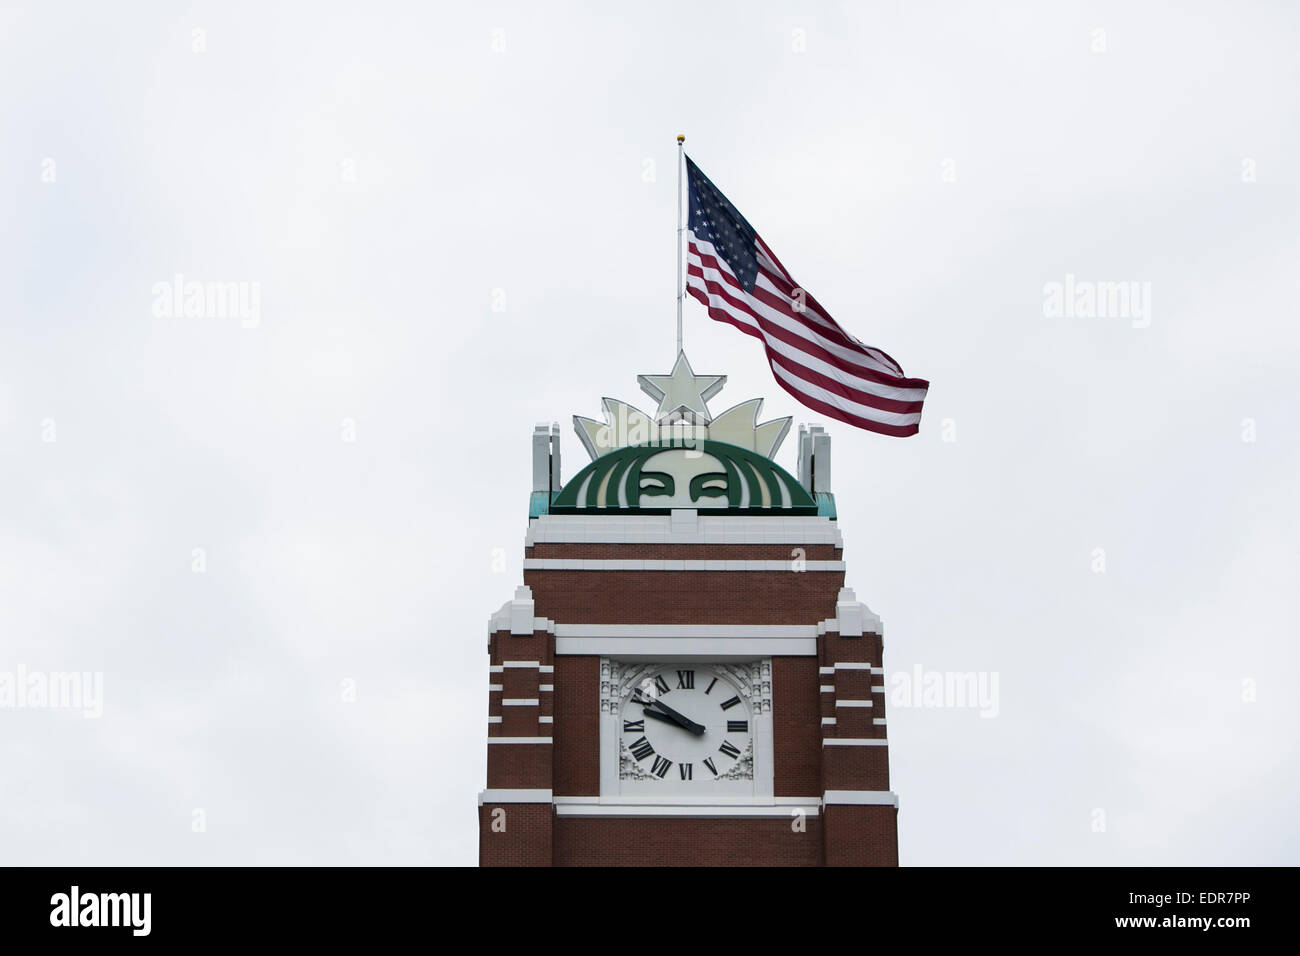 A logo sign outside the headquarters of the Starbucks Coffee Company in Seattle, Washington. Stock Photo